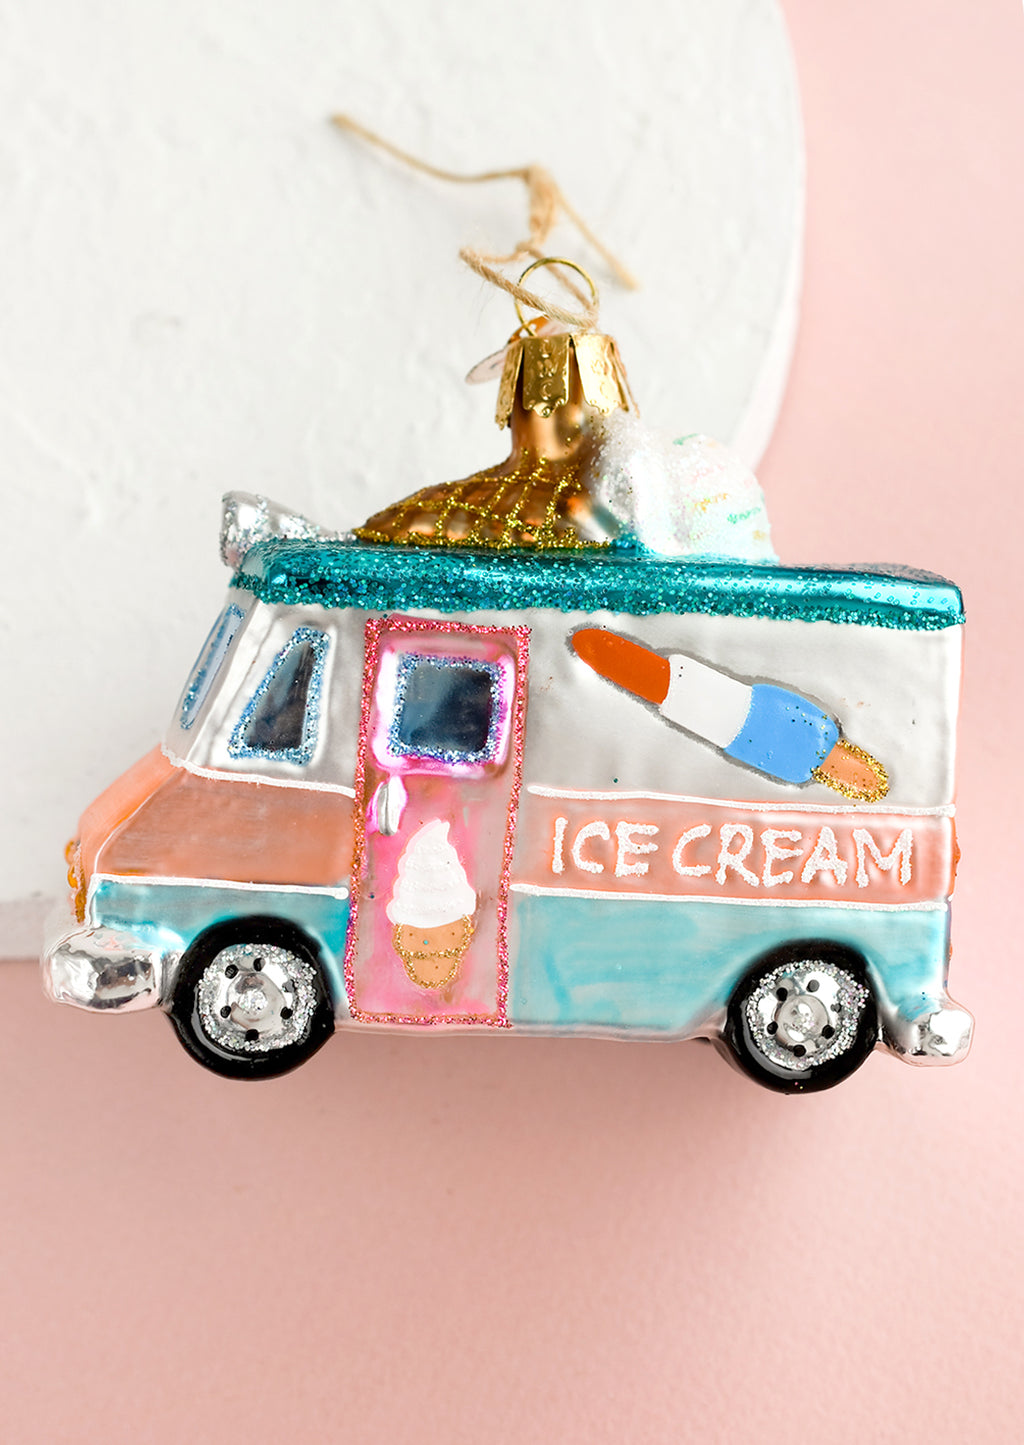 2: A holiday glass ornament of an ice cream truck.